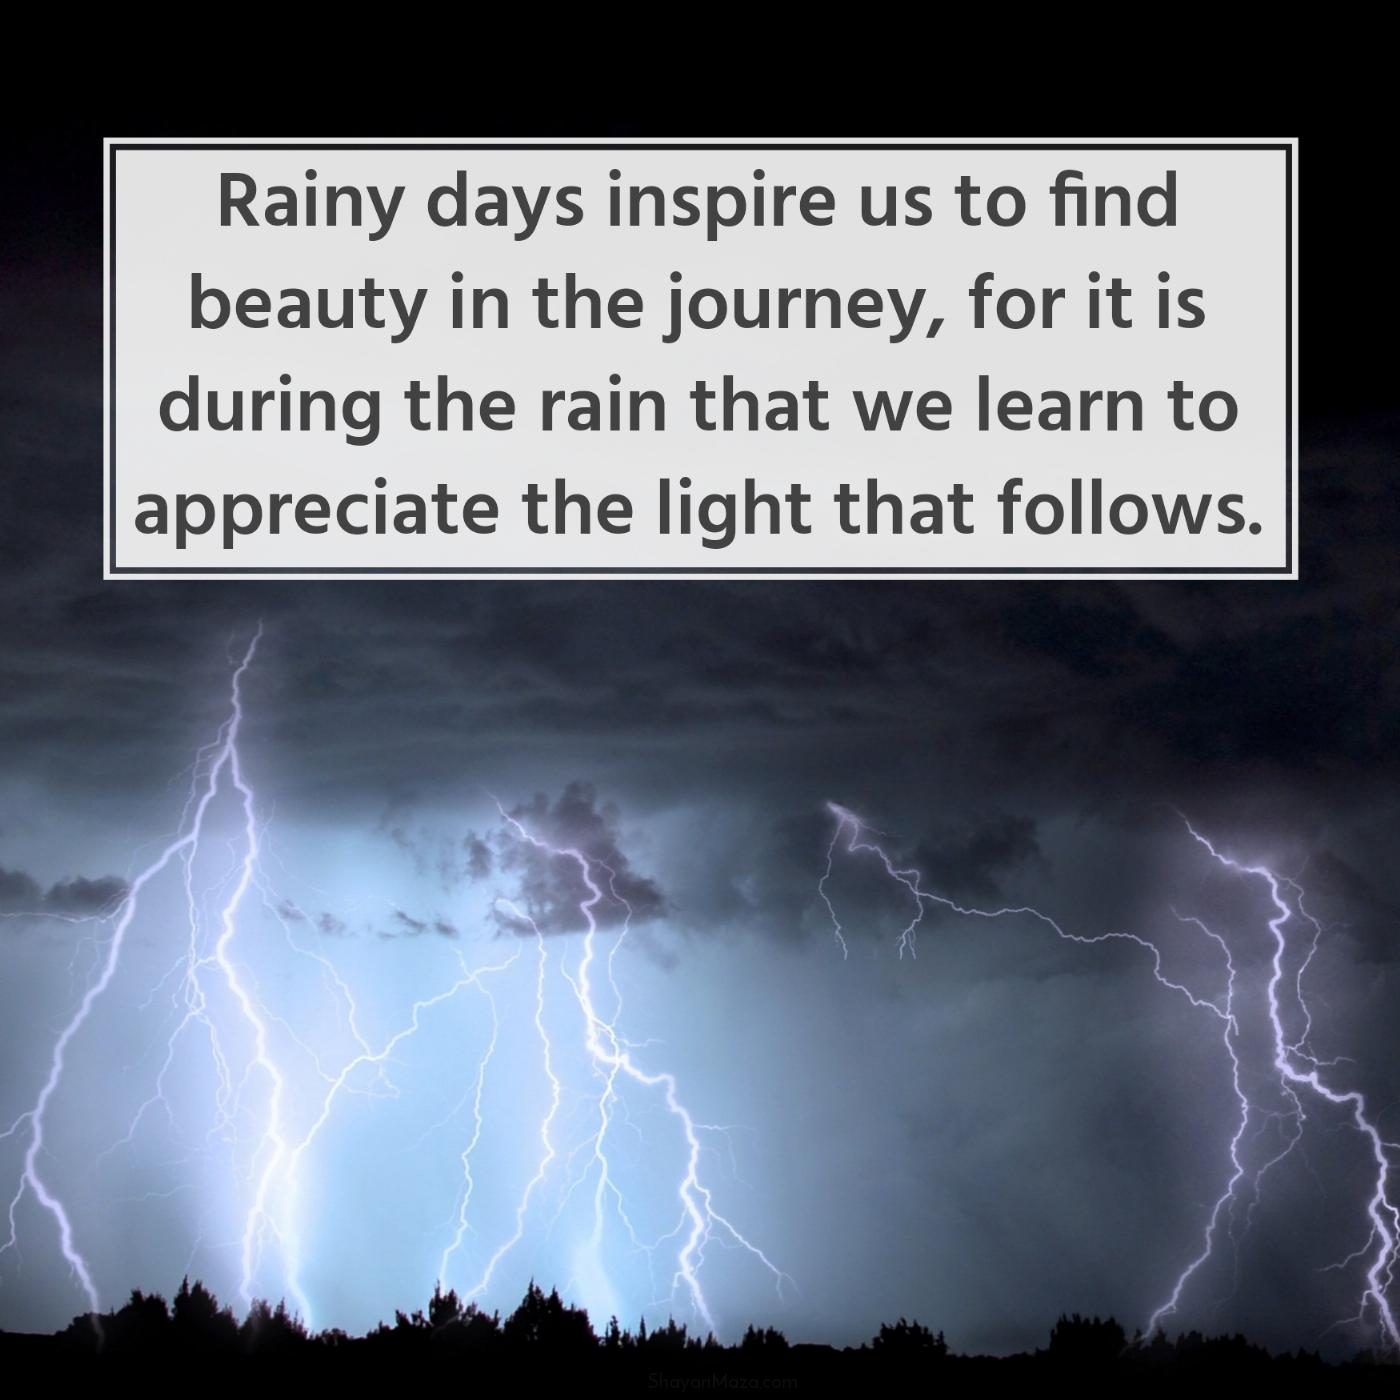 Rainy days inspire us to find beauty in the journey